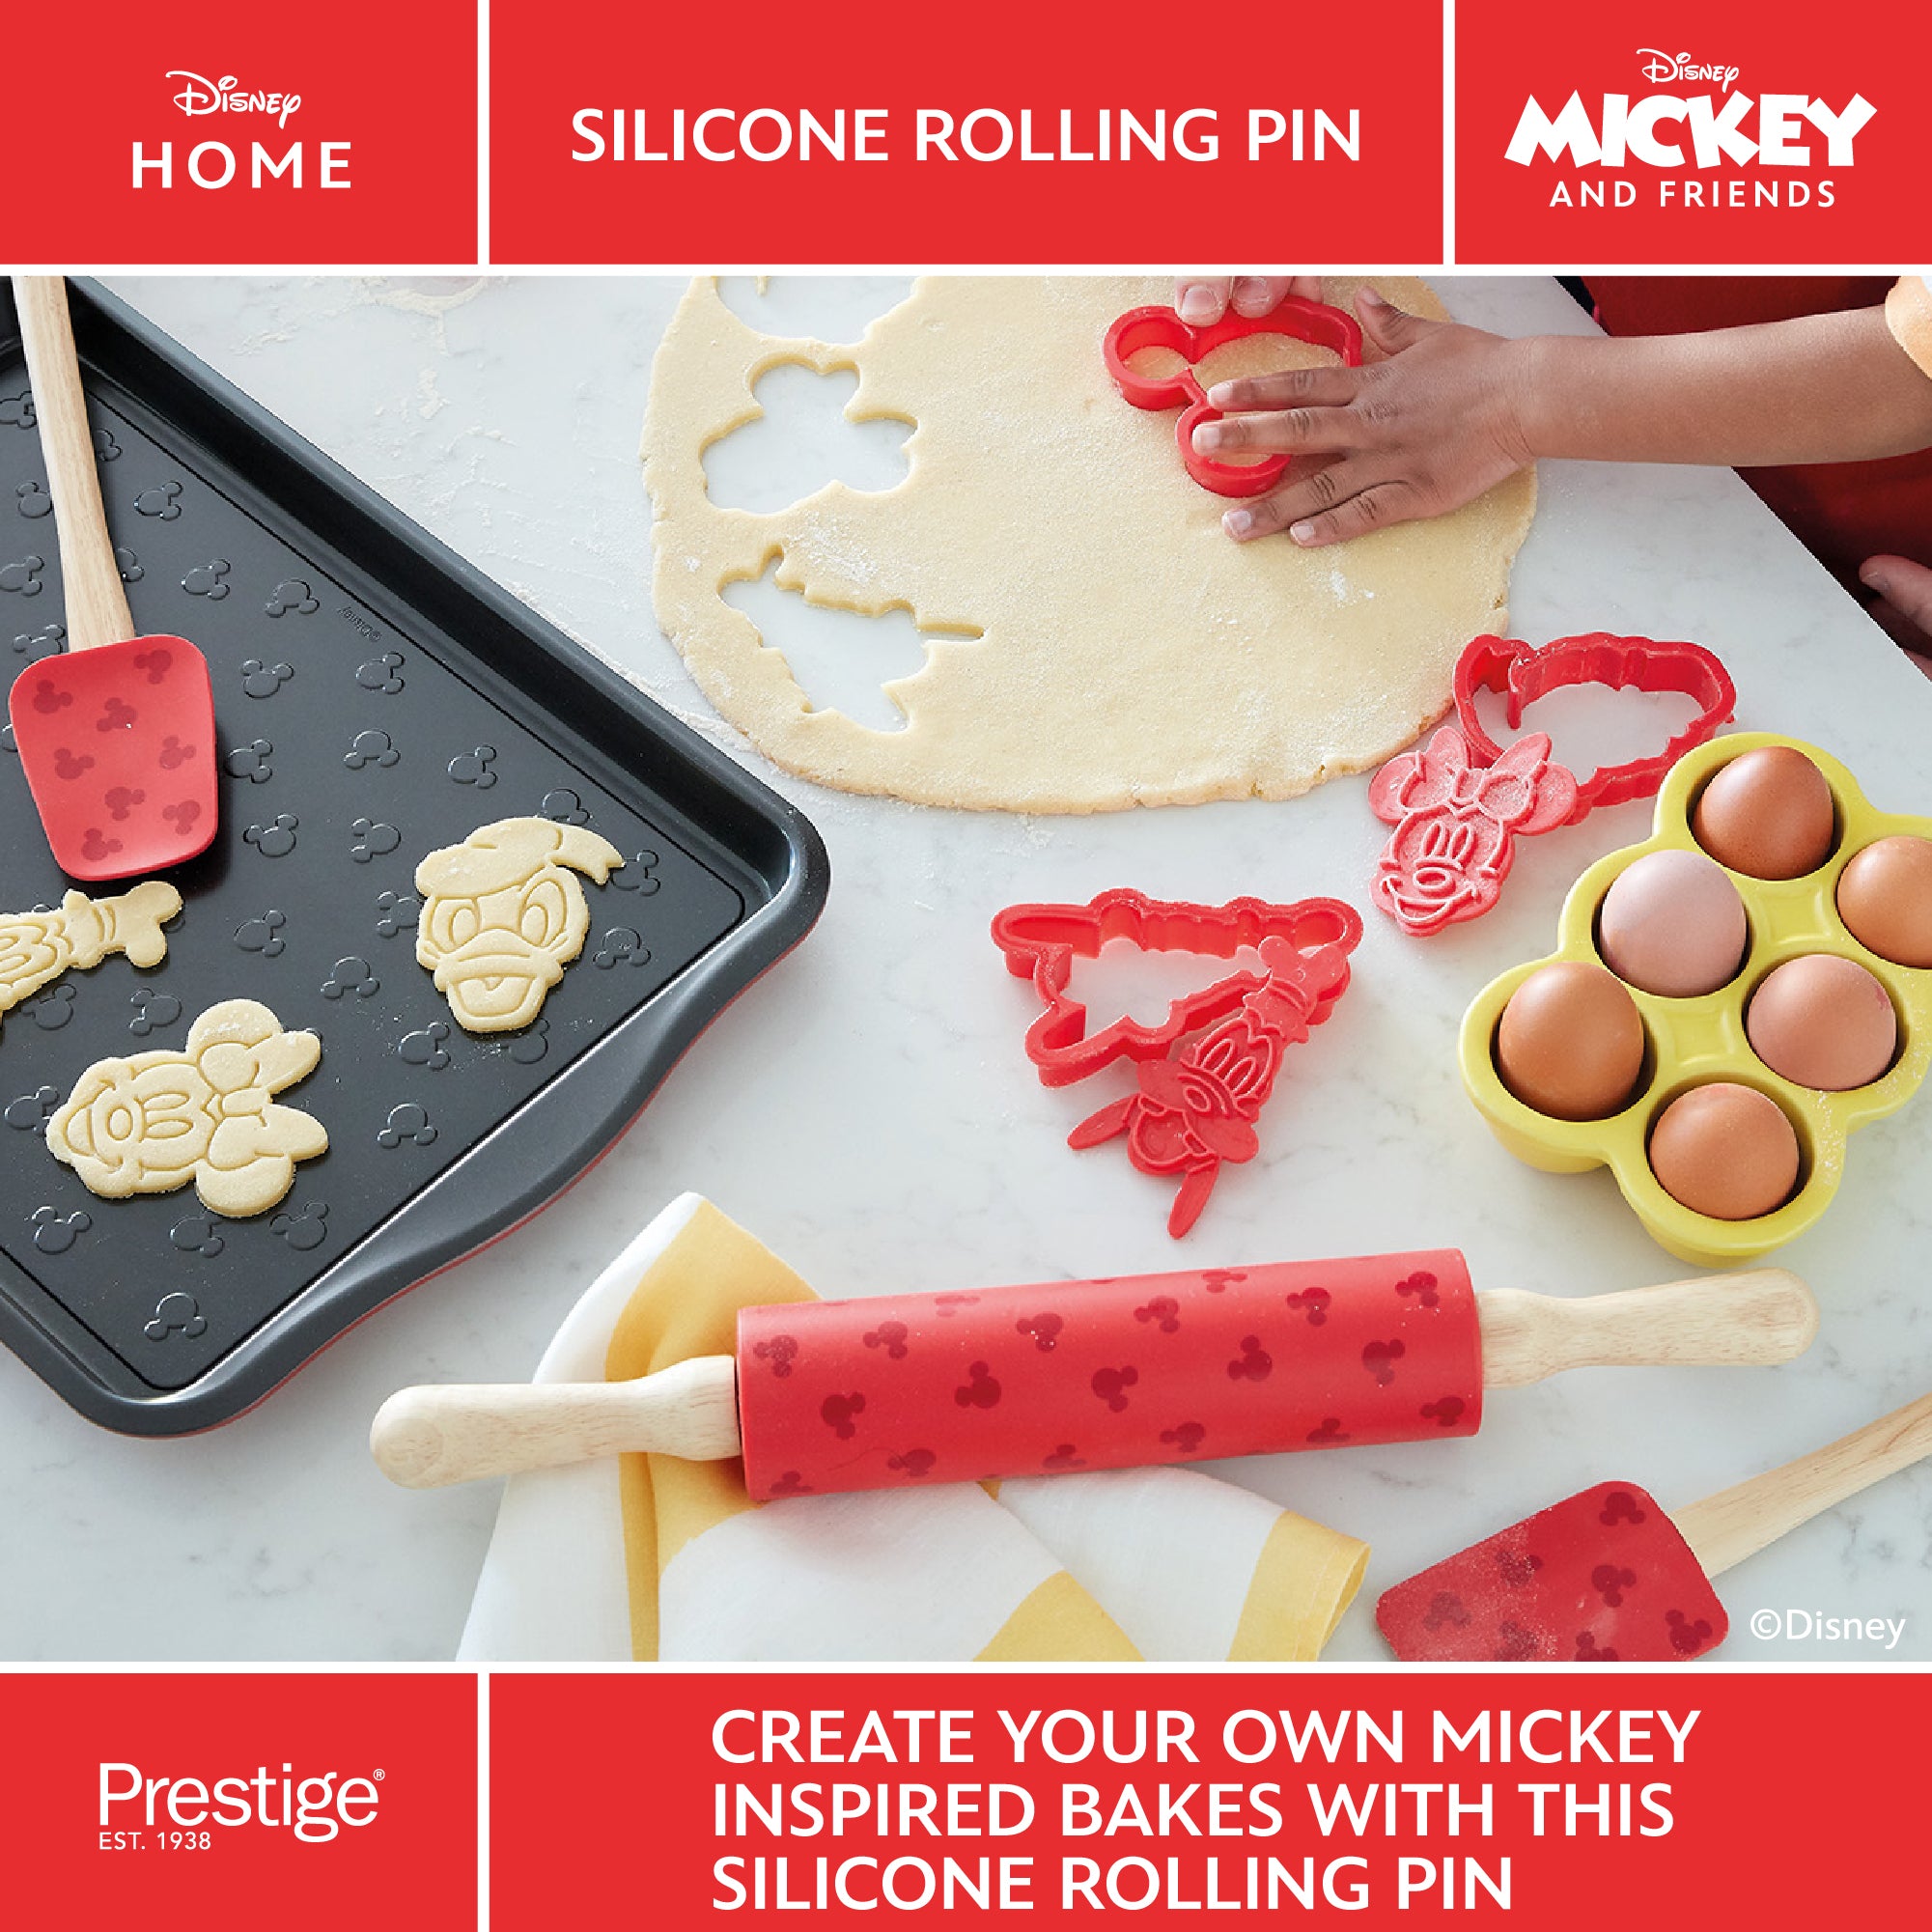 DISNEY SILICONE ROLLING PIN